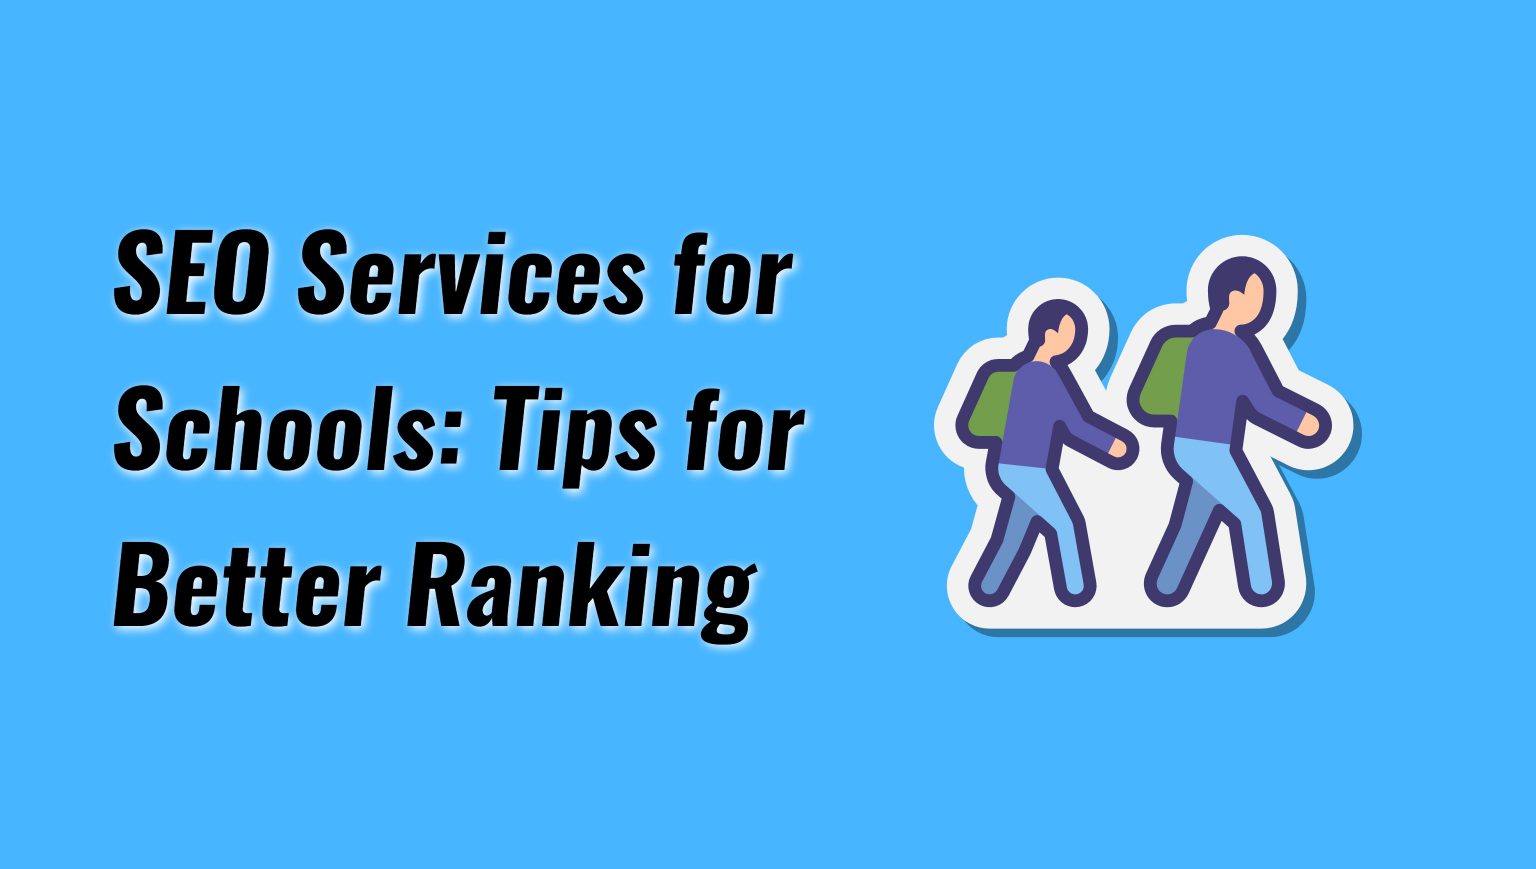 SEO Services for Schools: Tips for a Better Ranking